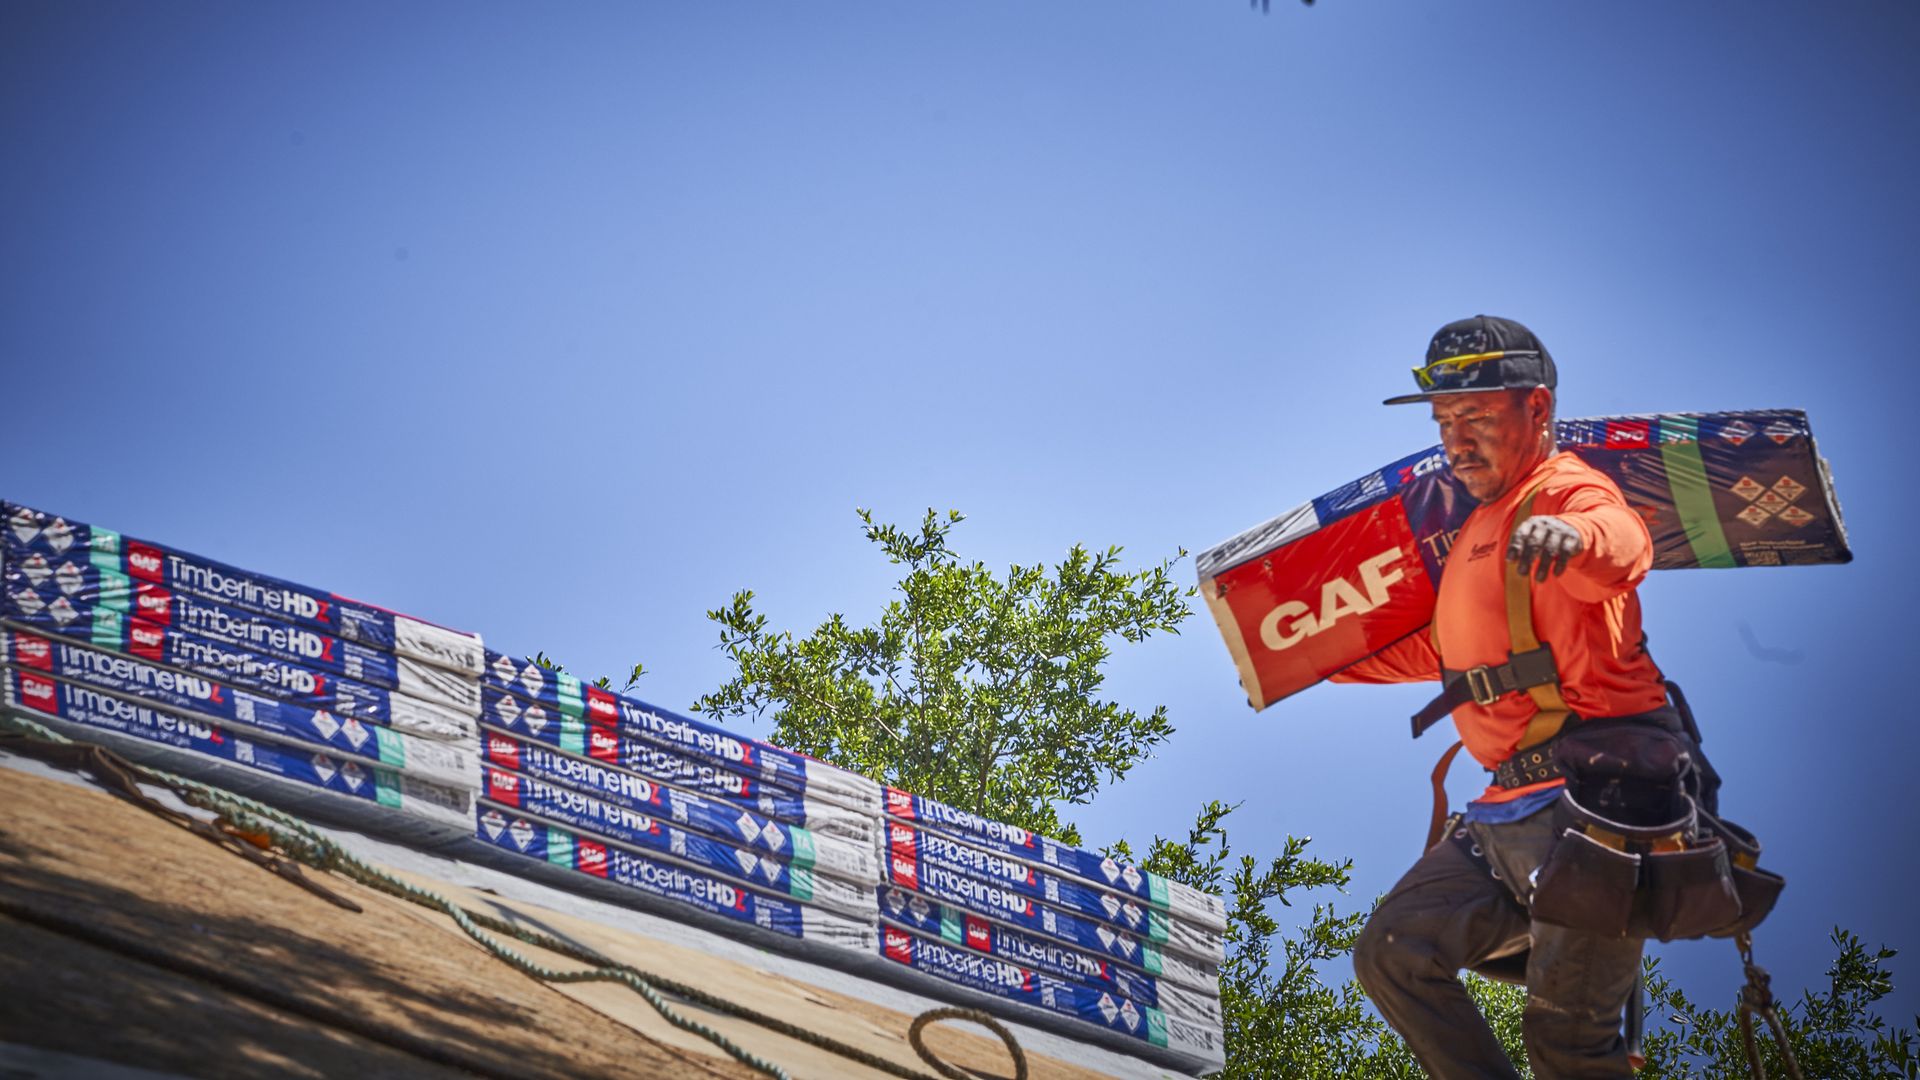 A roofer hauls shingles on a rooftop.